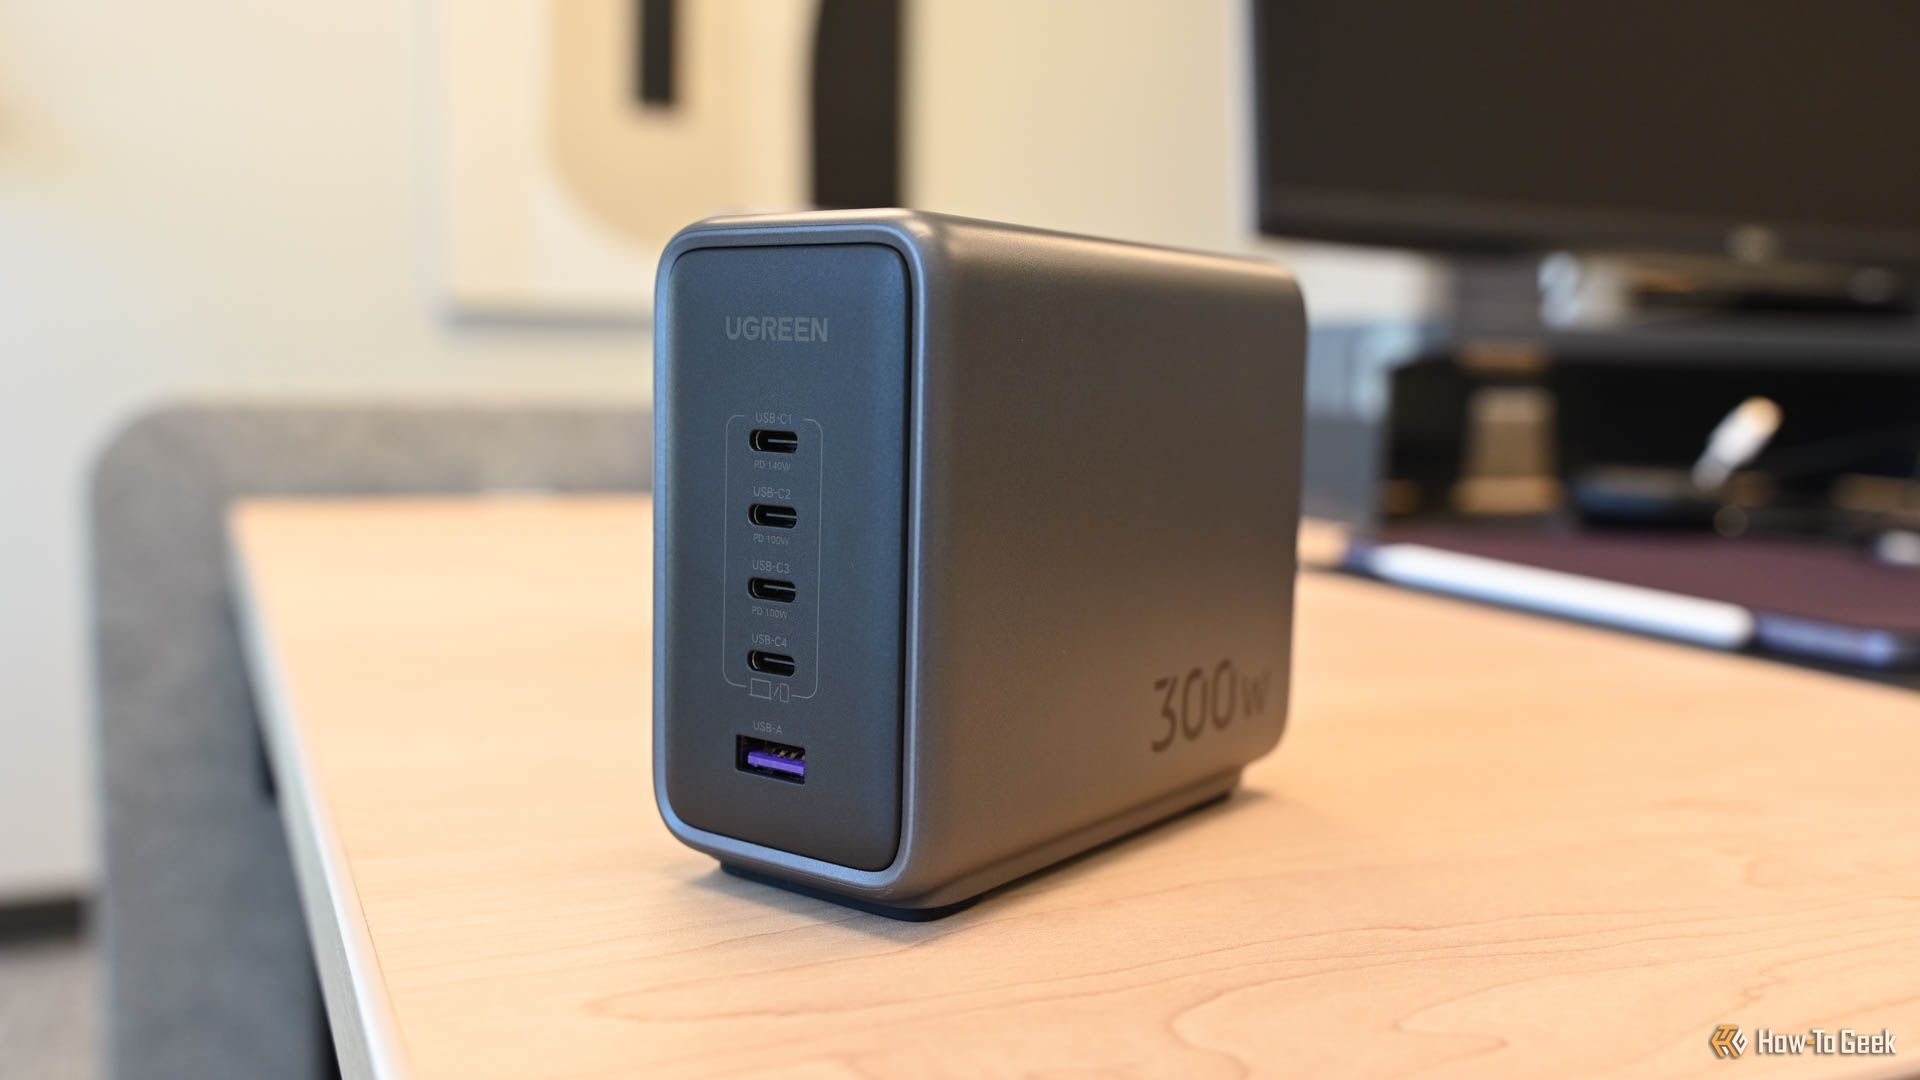 Ugreen's 300W GaN charger features four high-power USB-C ports for all your  devices - The Verge